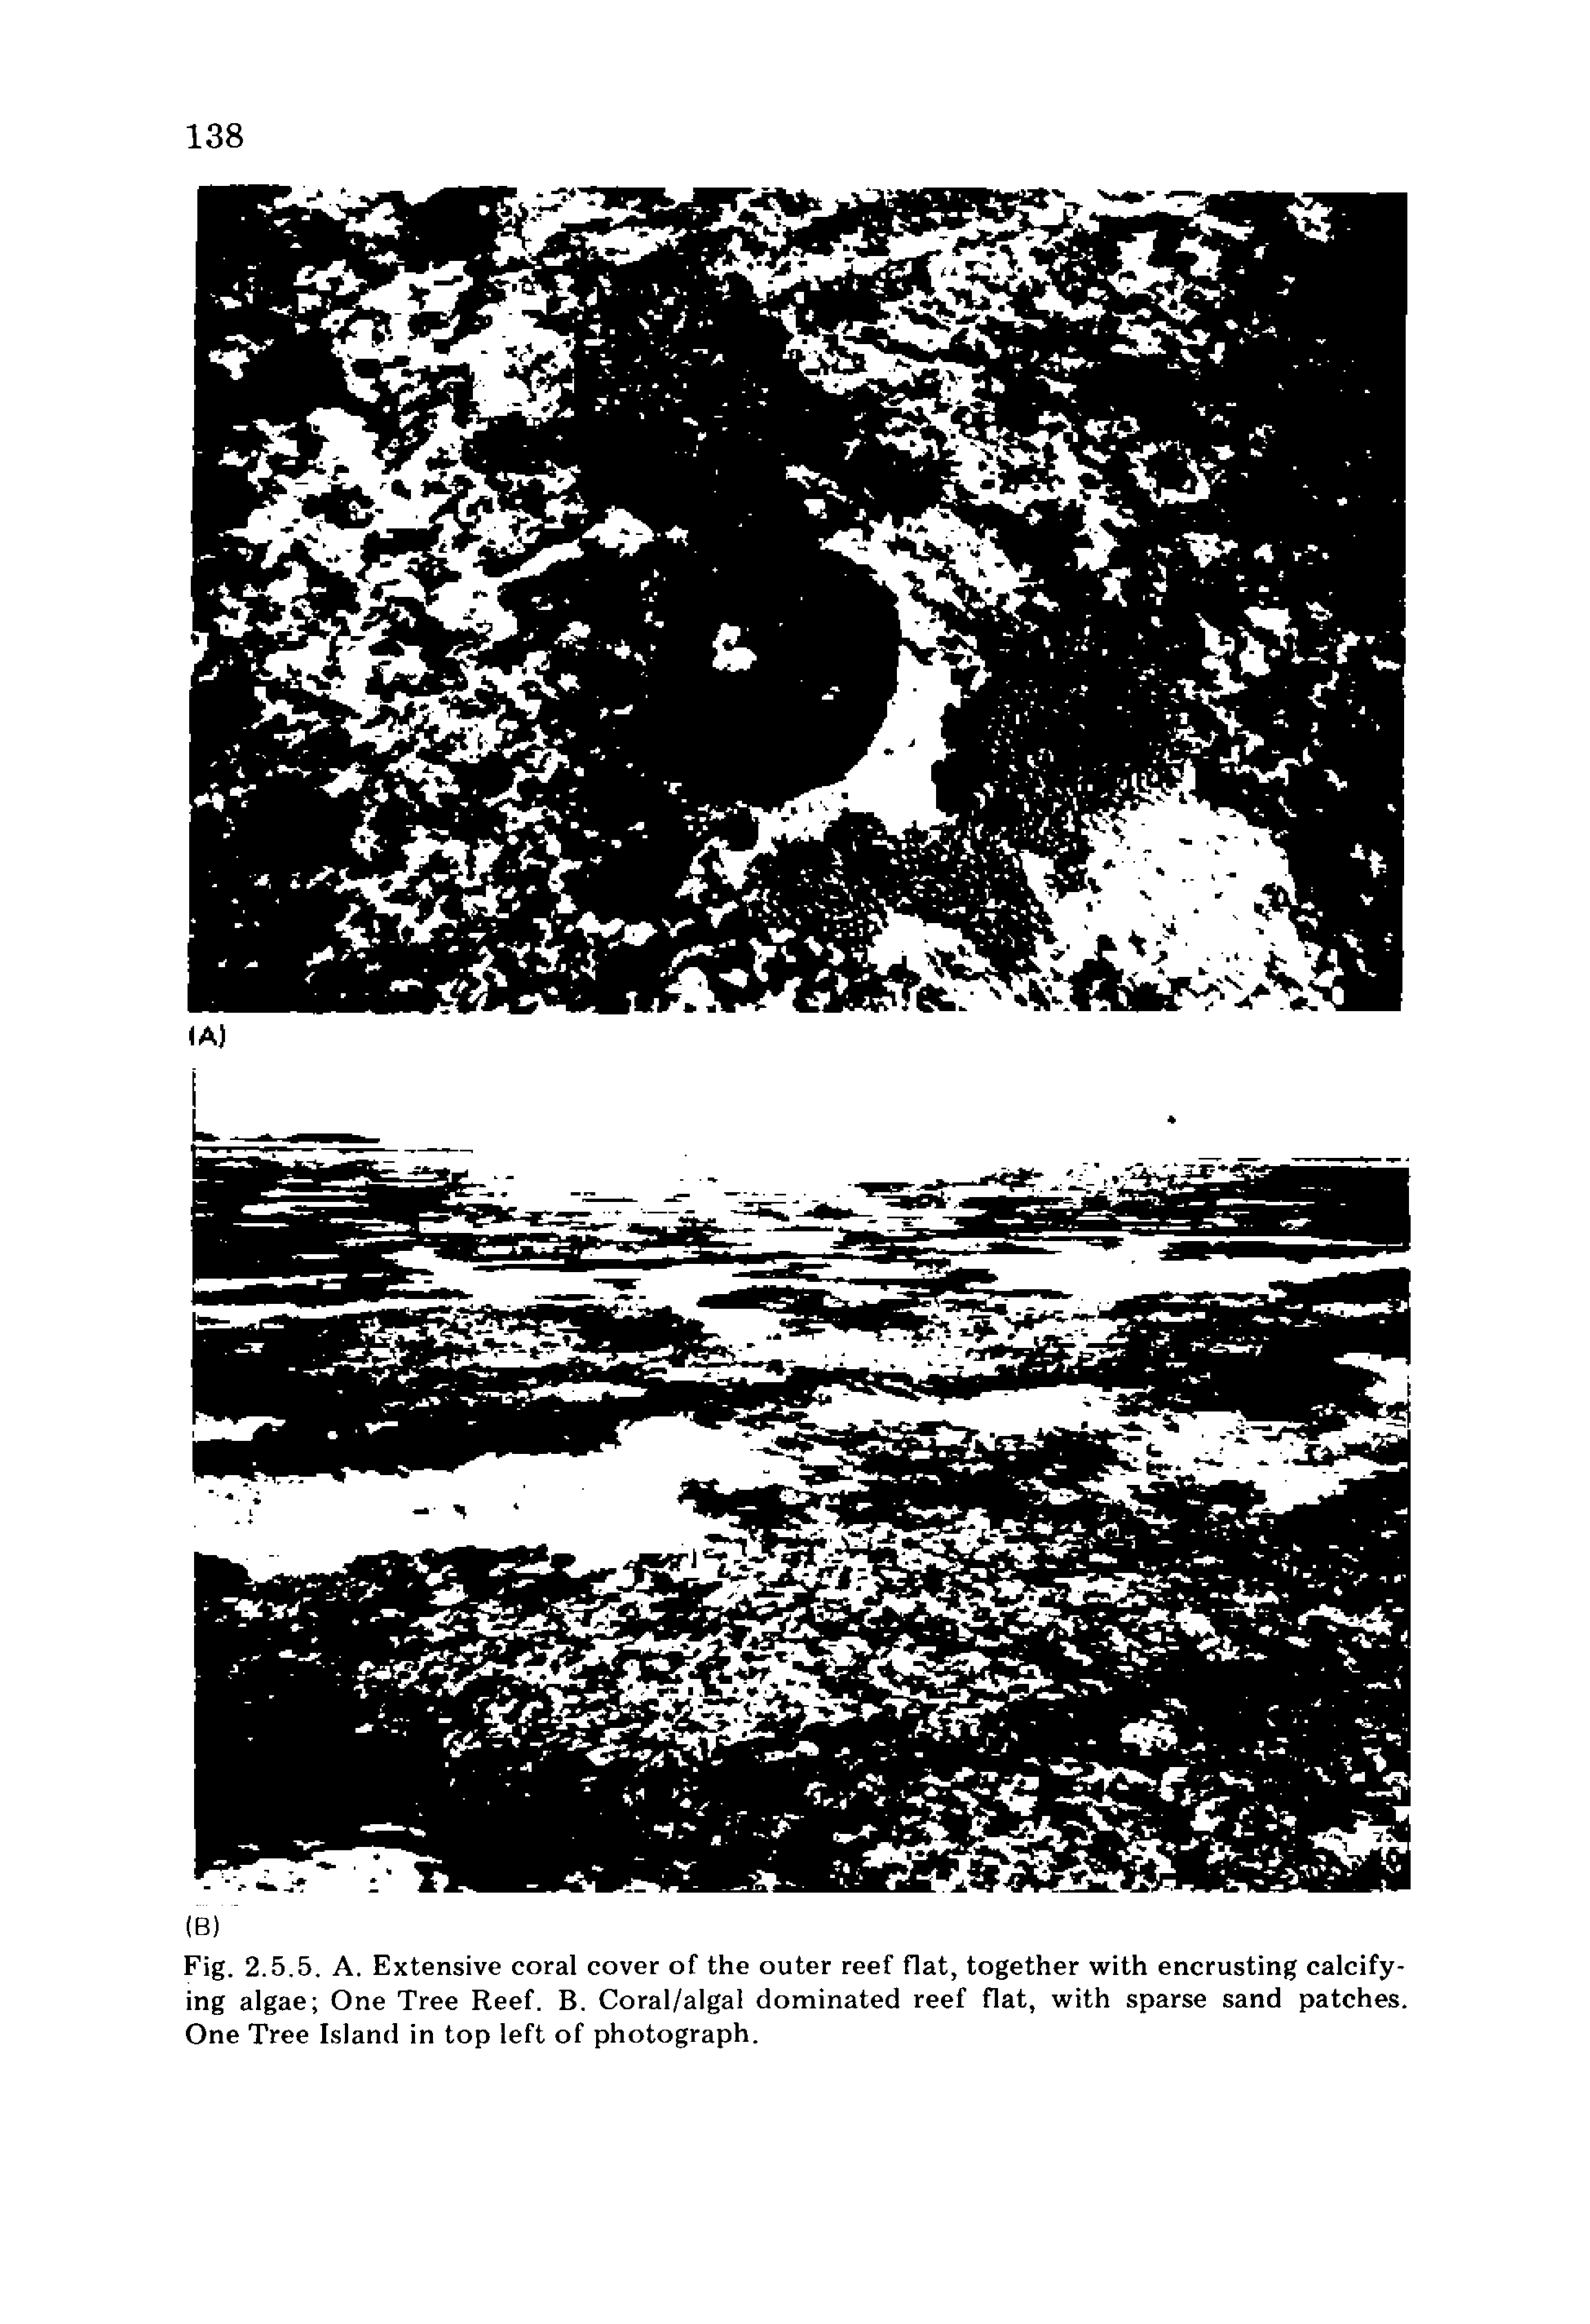 Fig. 2.5.5. A. Extensive coral cover of the outer reef flat, together with encrusting calcifying algae One Tree Reef. B. Coral/algal dominated reef flat, with sparse sand patches. One Tree Island in top left of photograph.